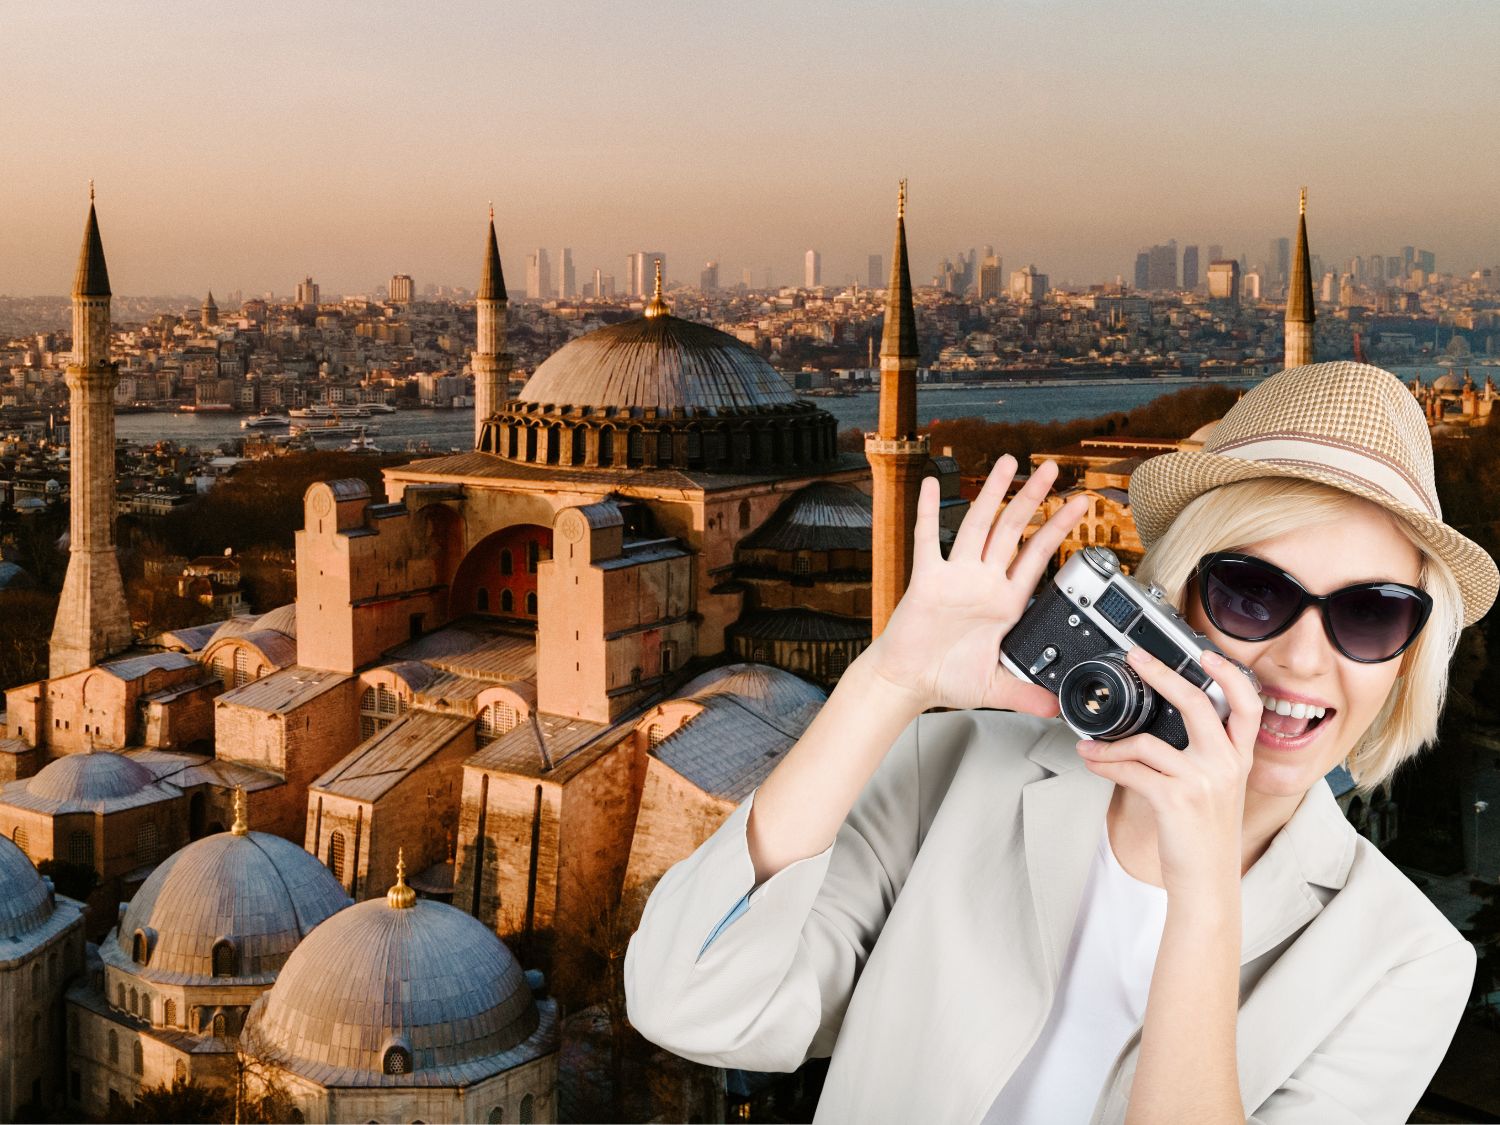 The 8 Best Turkey Tours For Unforgettable Adventures That Are Achievable & Affordable!